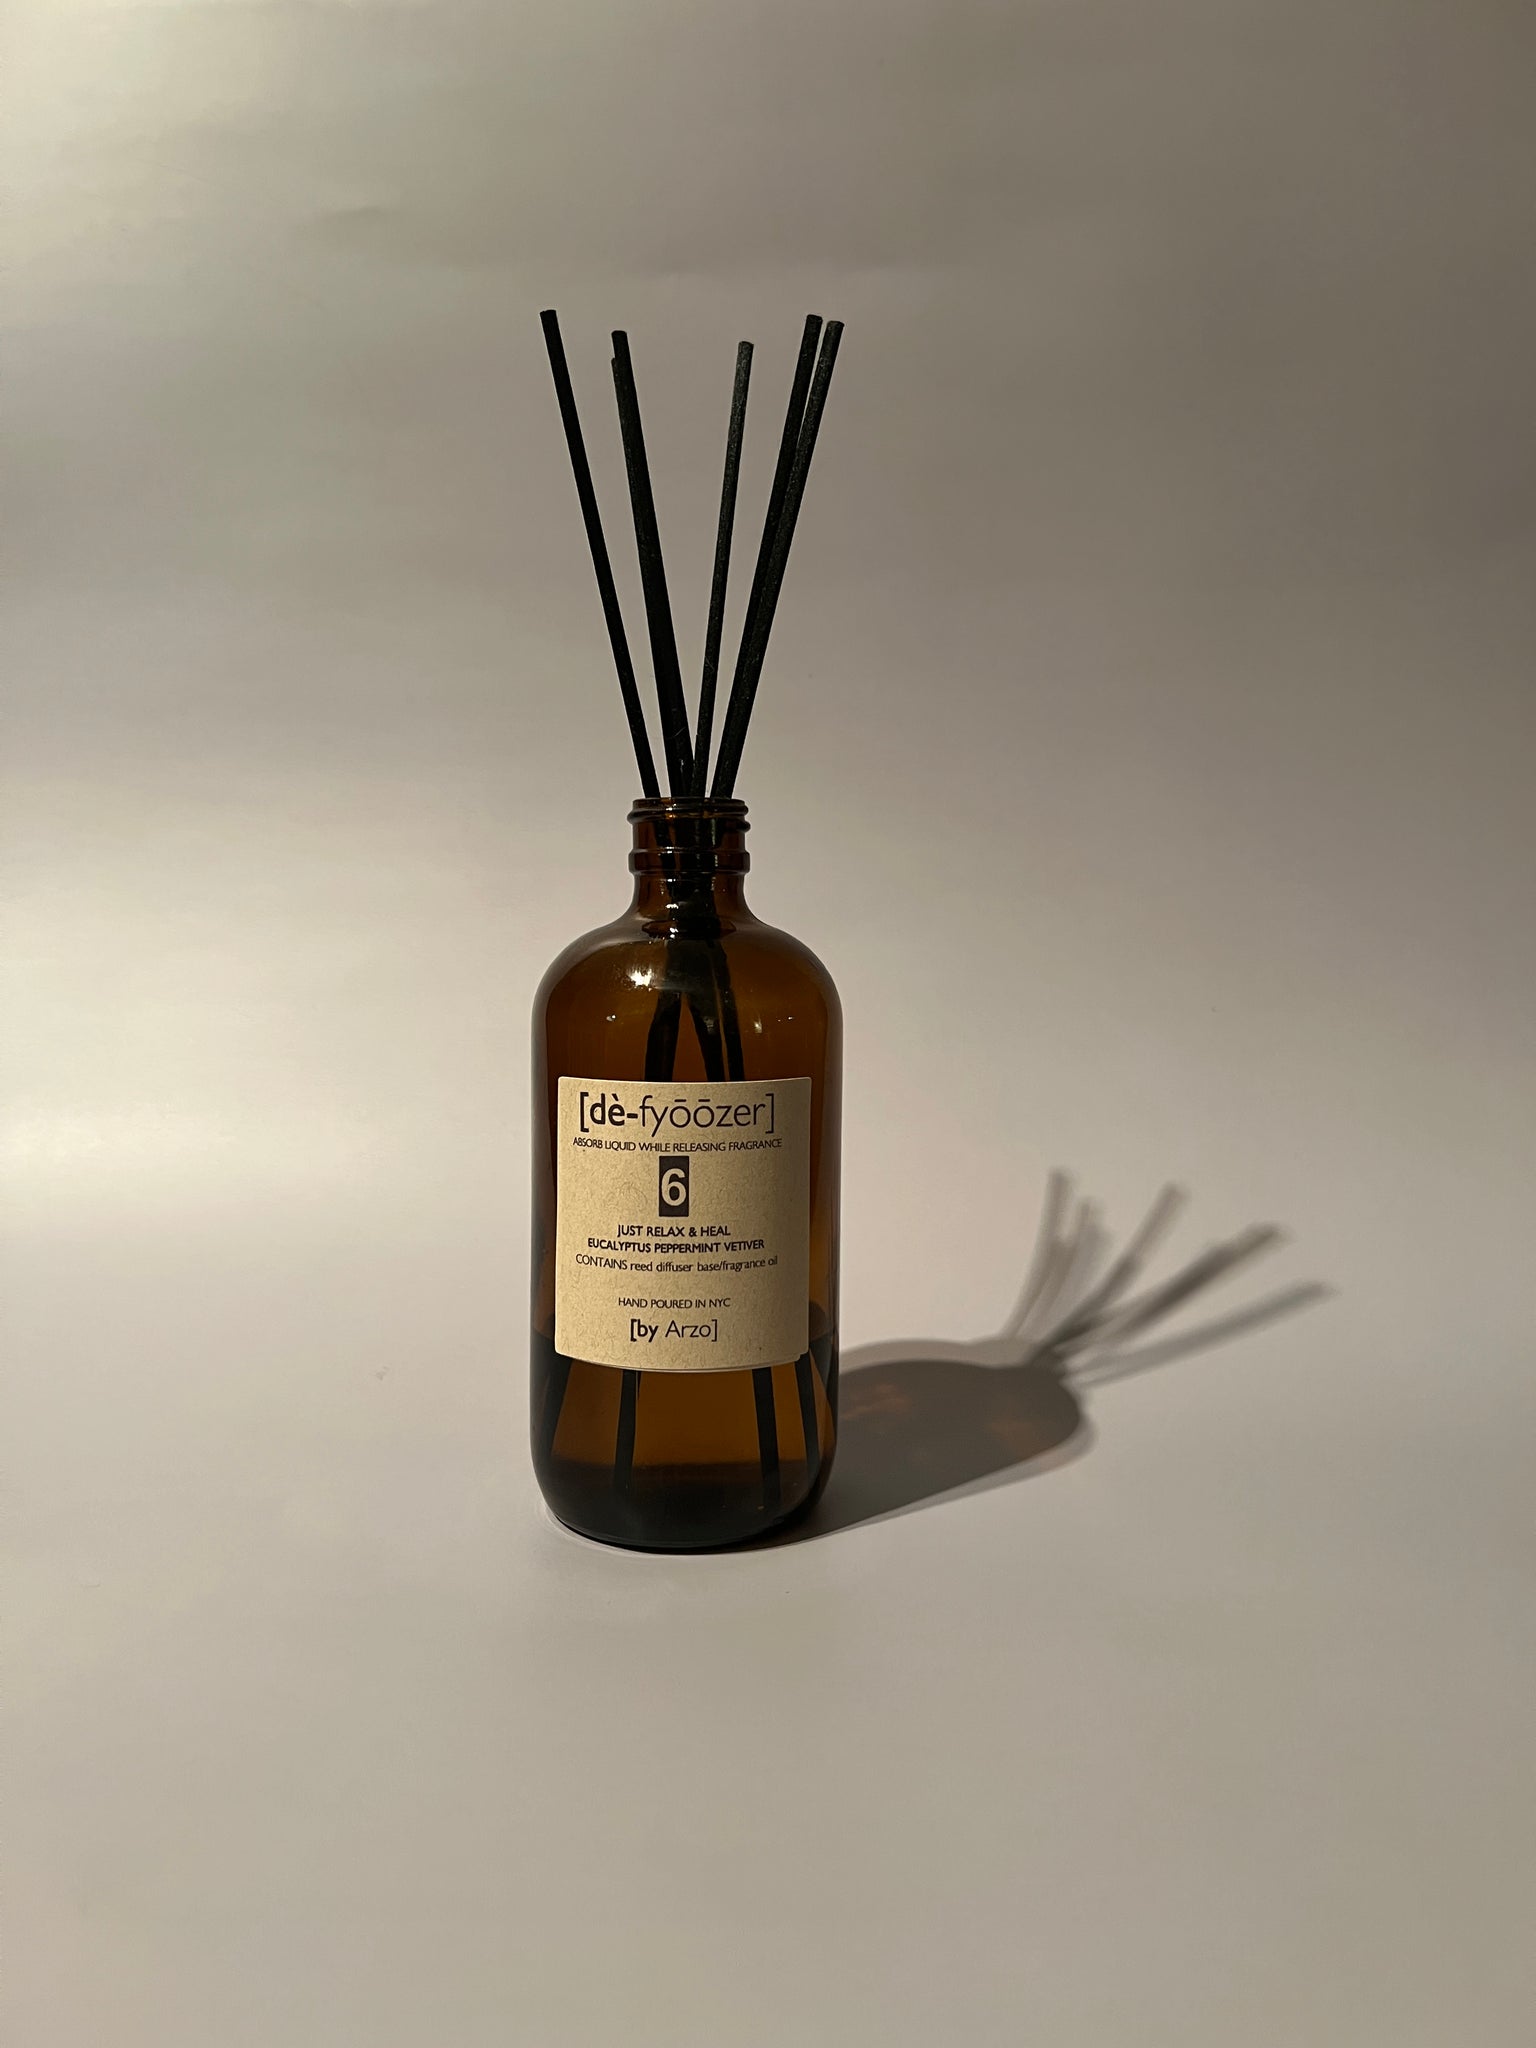 6 JUST RELAX & HEAL REED DIFFUSER